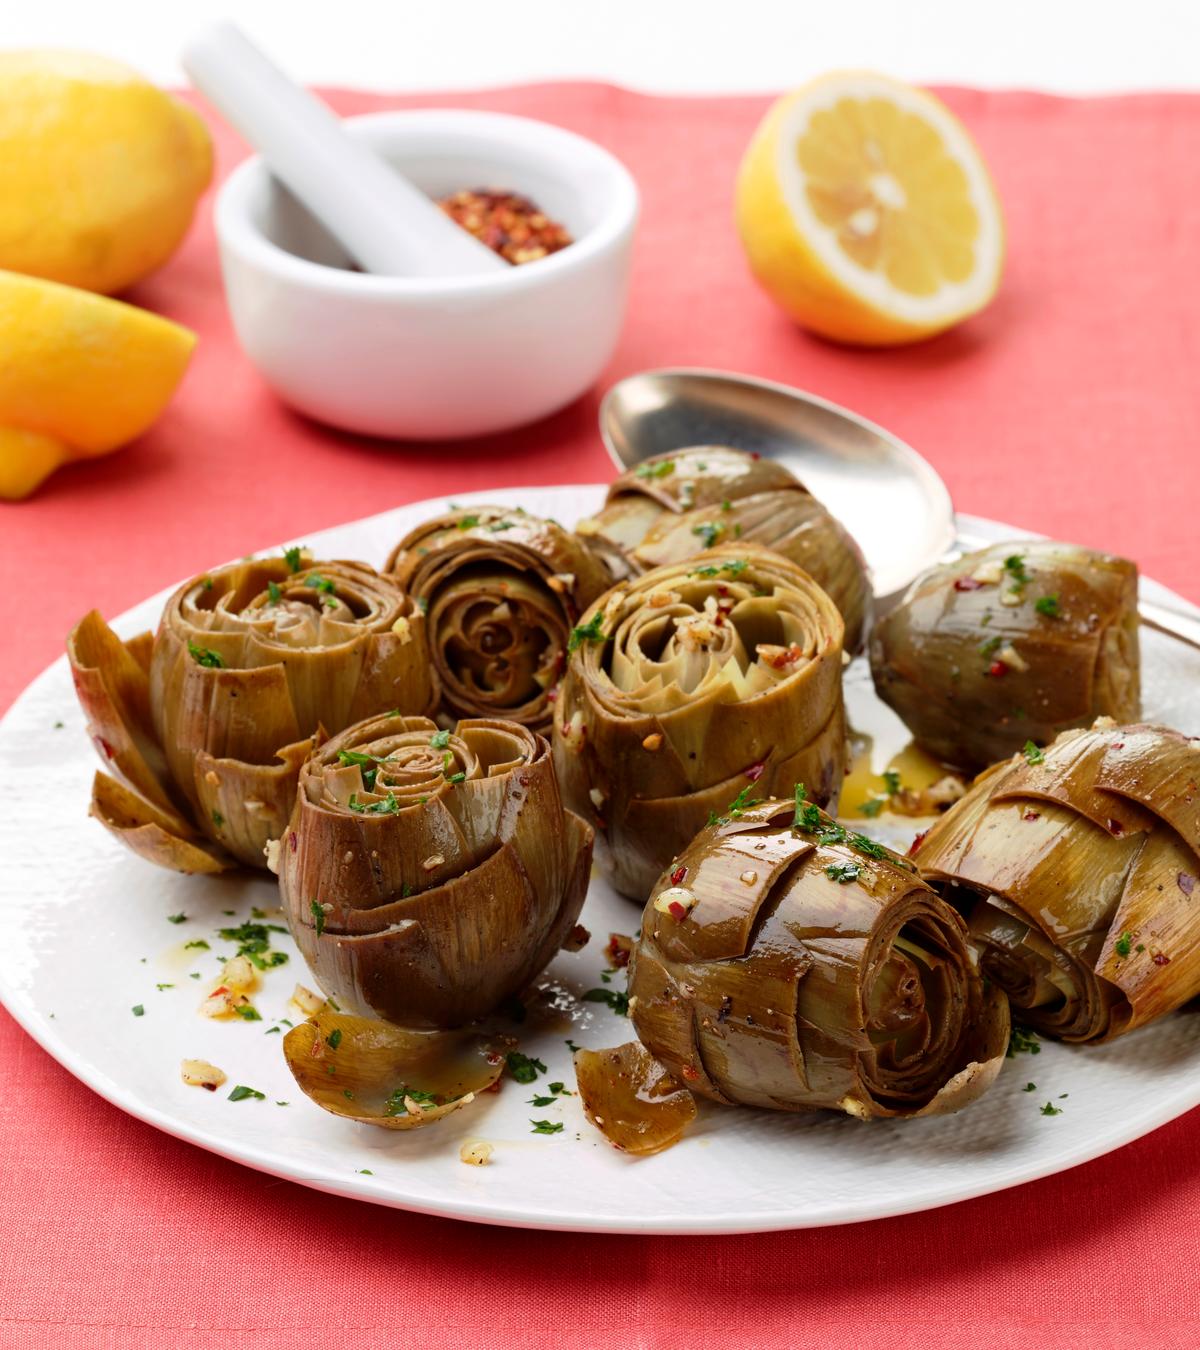 One of the best ways to prepare artichokes is also one of the simplest: boiled until tender and sautéed with extra-virgin olive oil, garlic, and crushed red chile flakes. (Photo from The Italian Diabetes Cookbook)